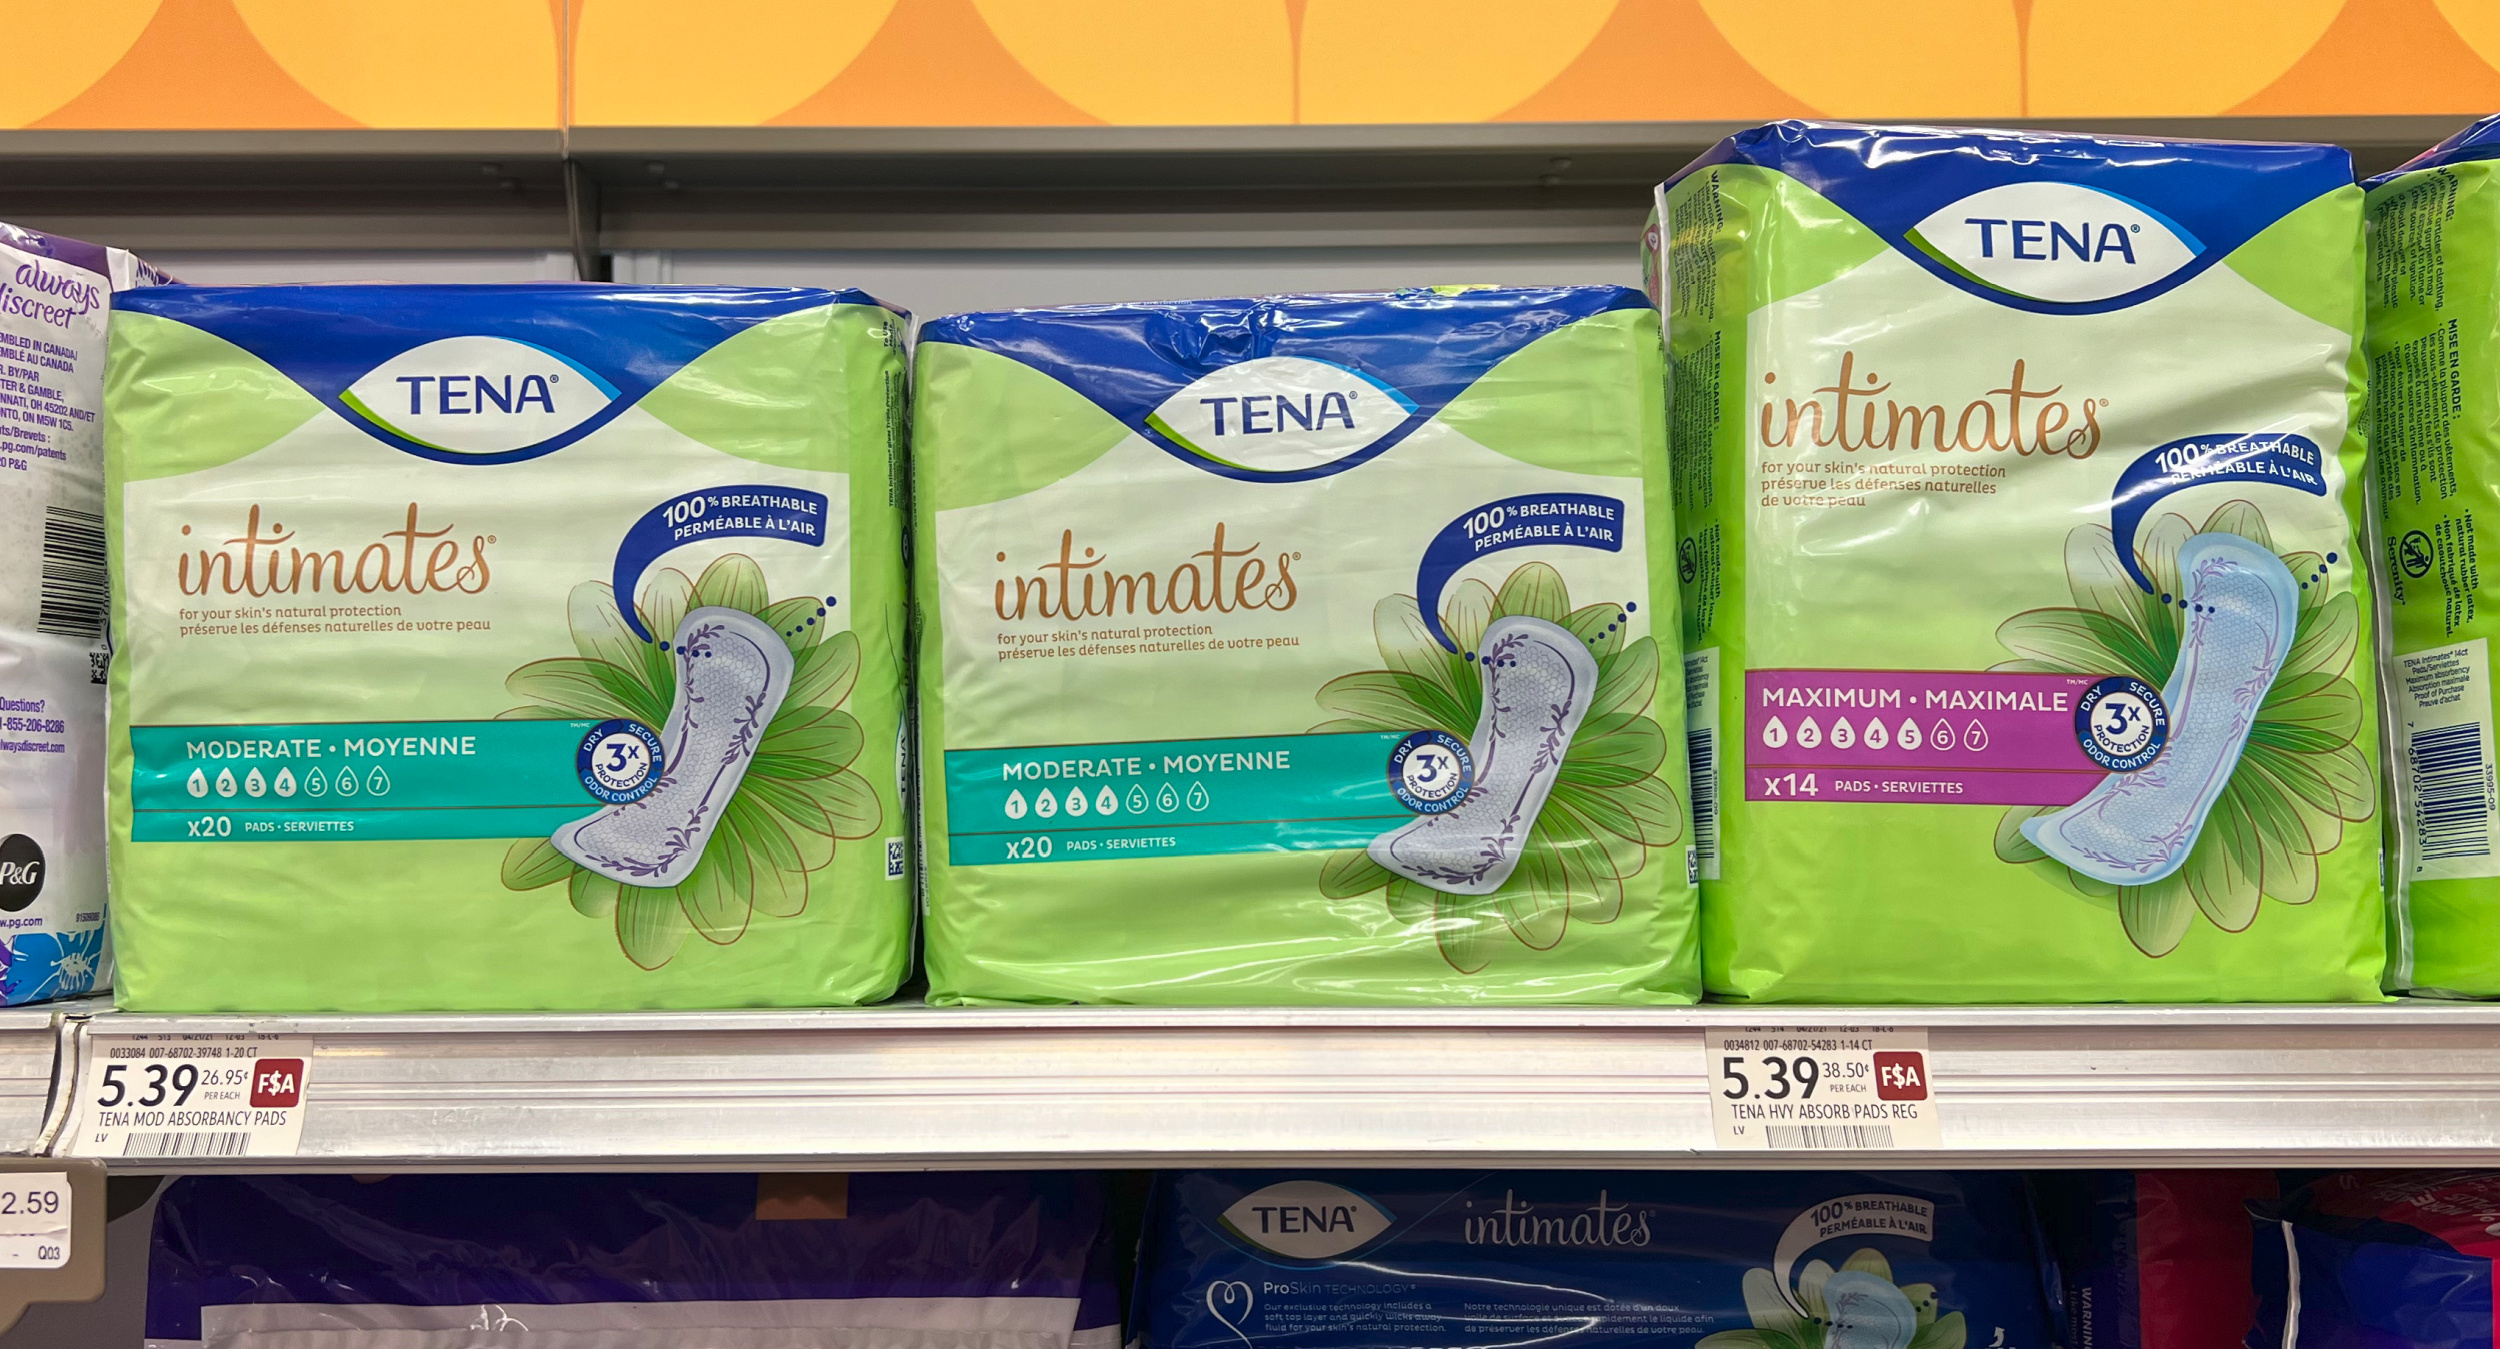 tena-pads-as-low-as-89-at-publix-iheartpublix